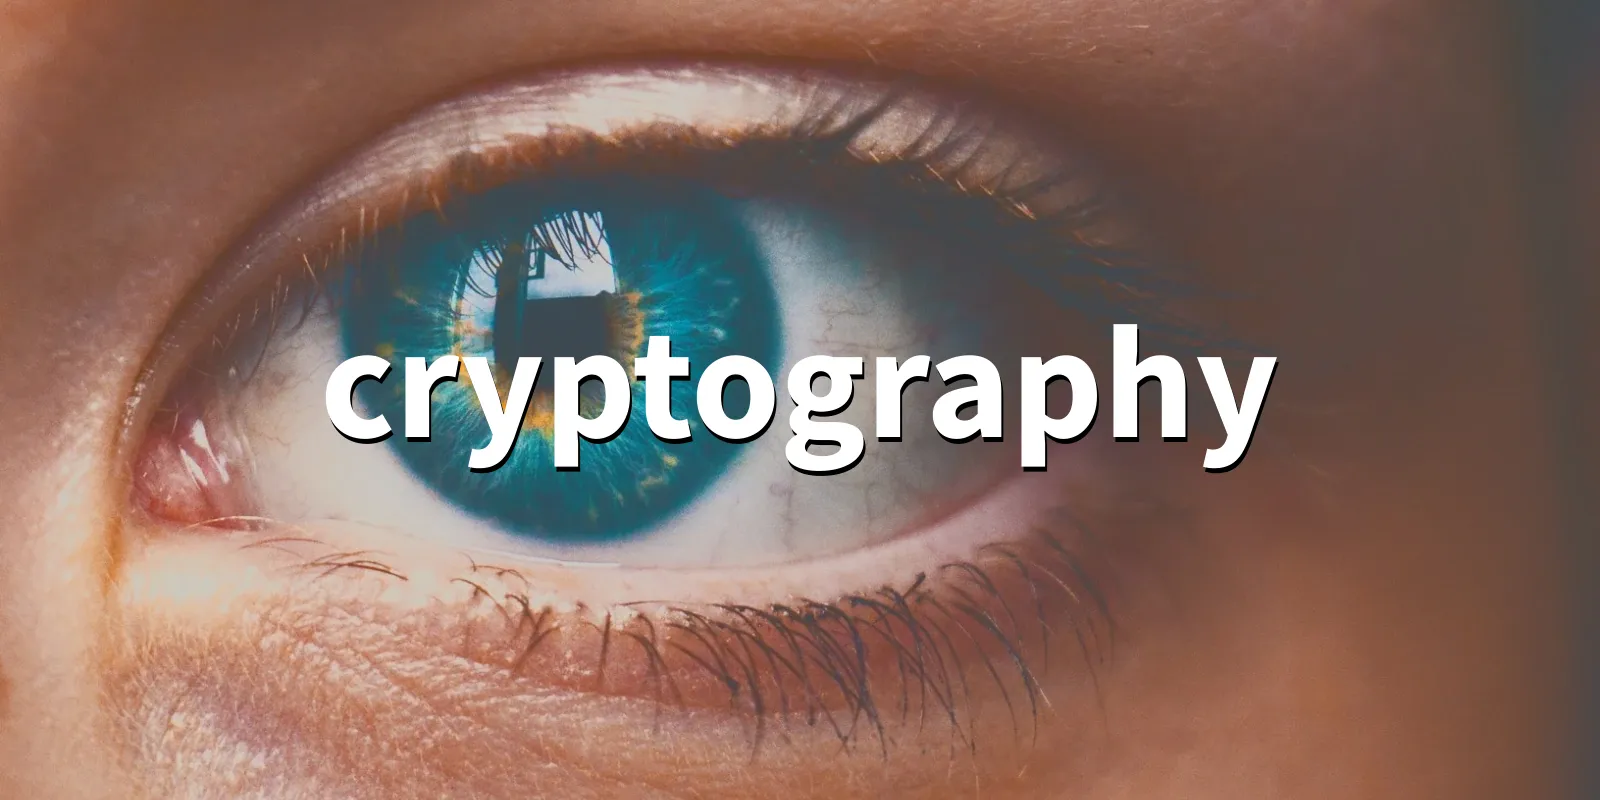 /pkg/c/cryptography/cryptography-banner.webp